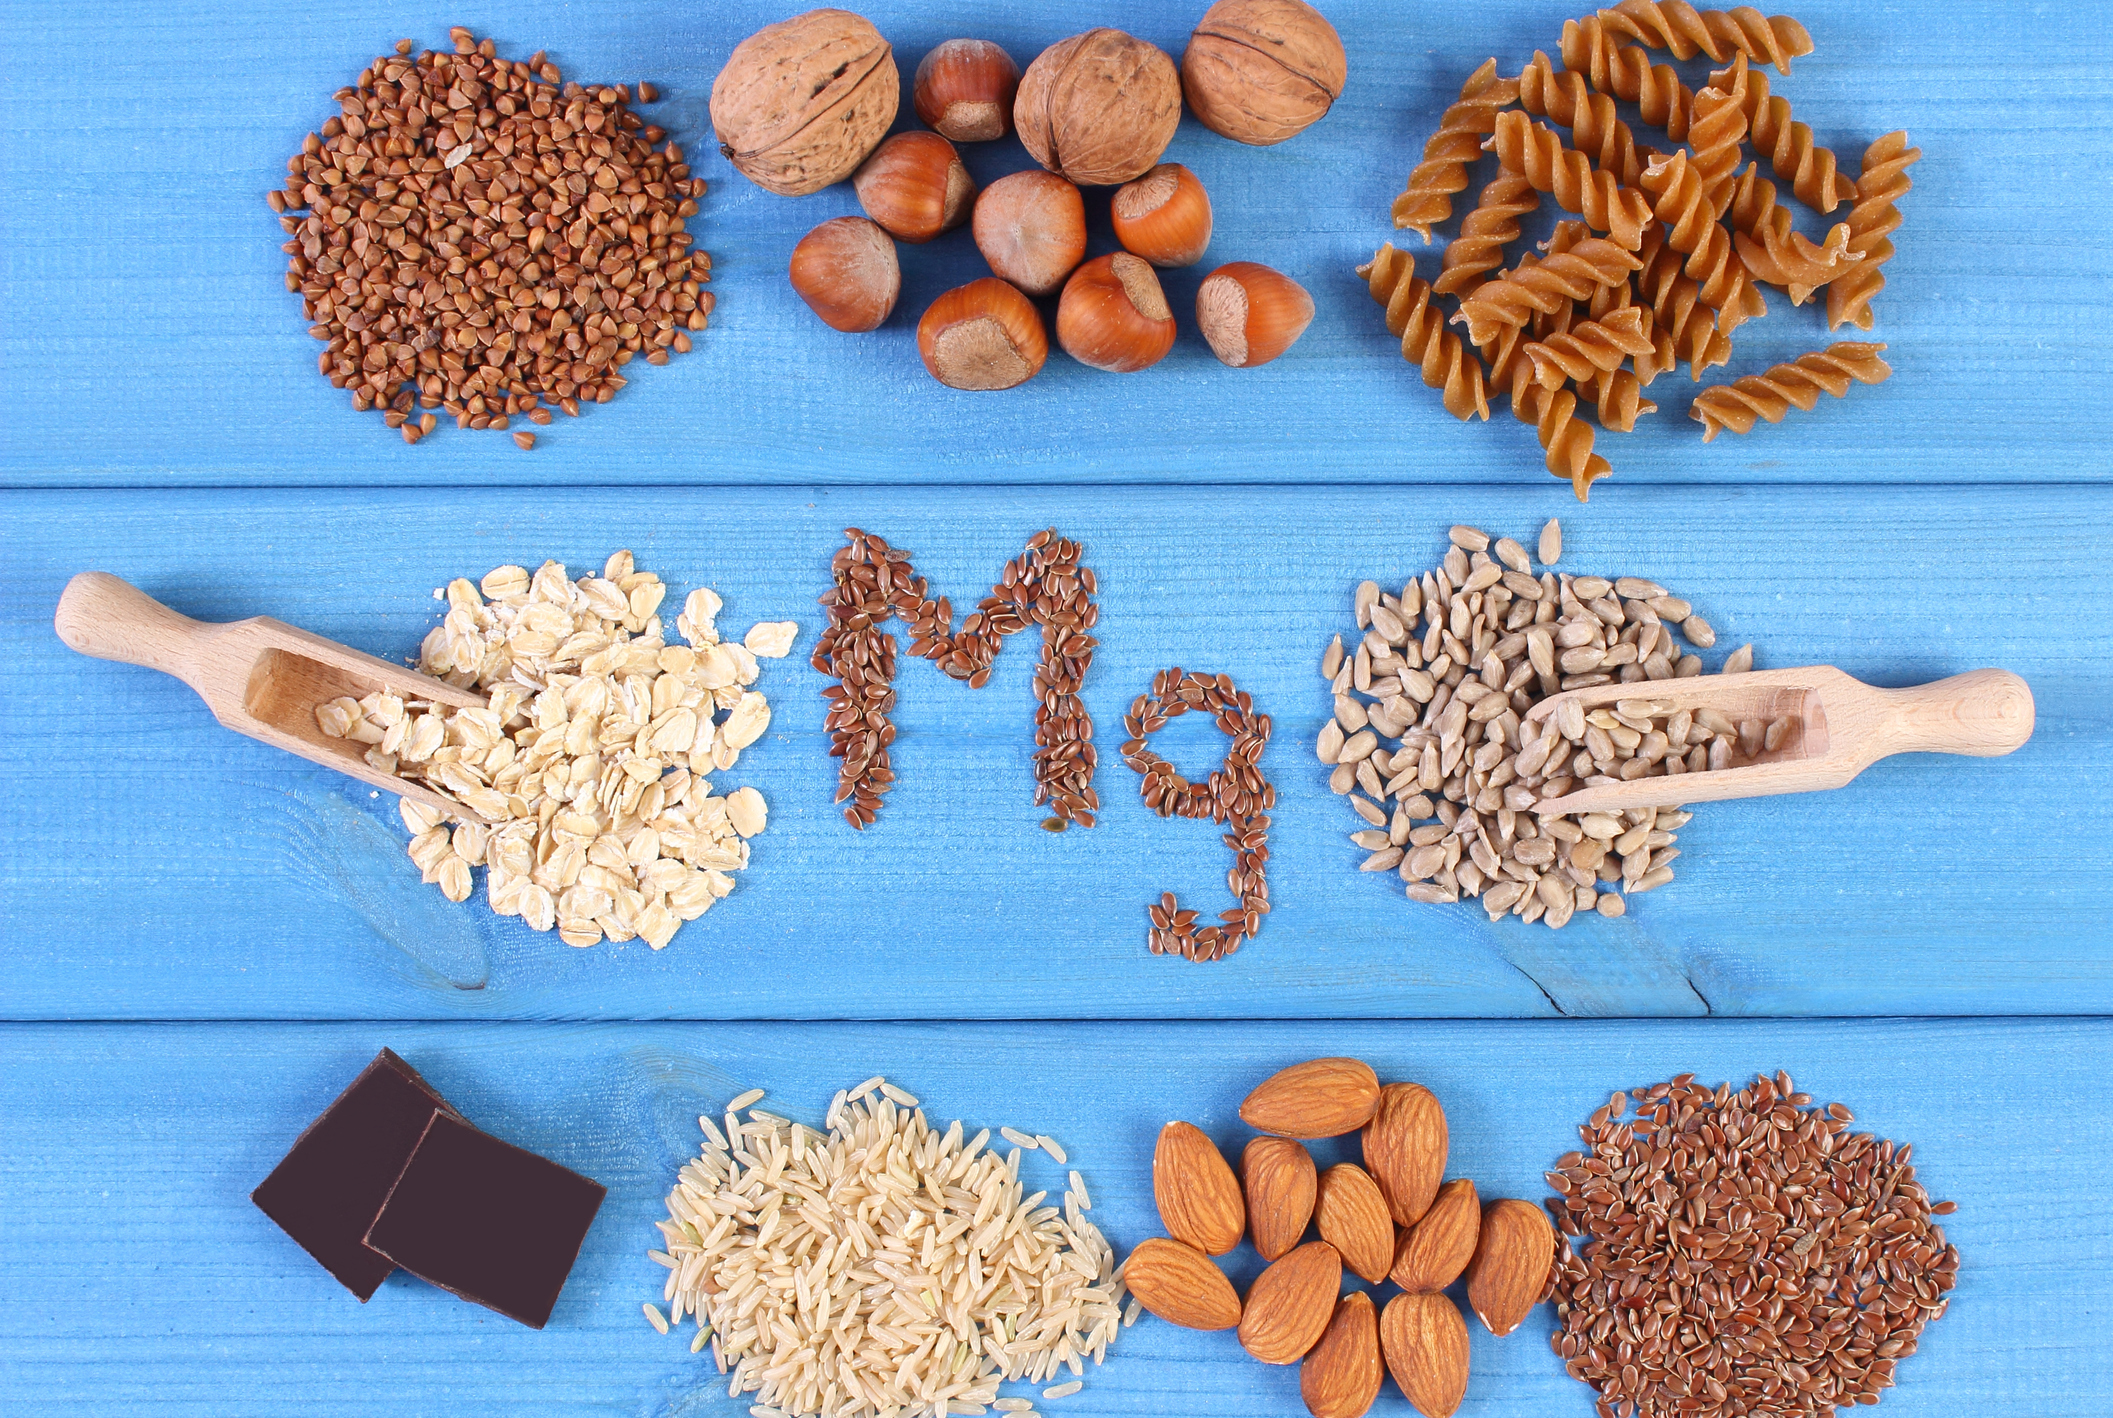 Want cancer protection? Magnesium levels matter